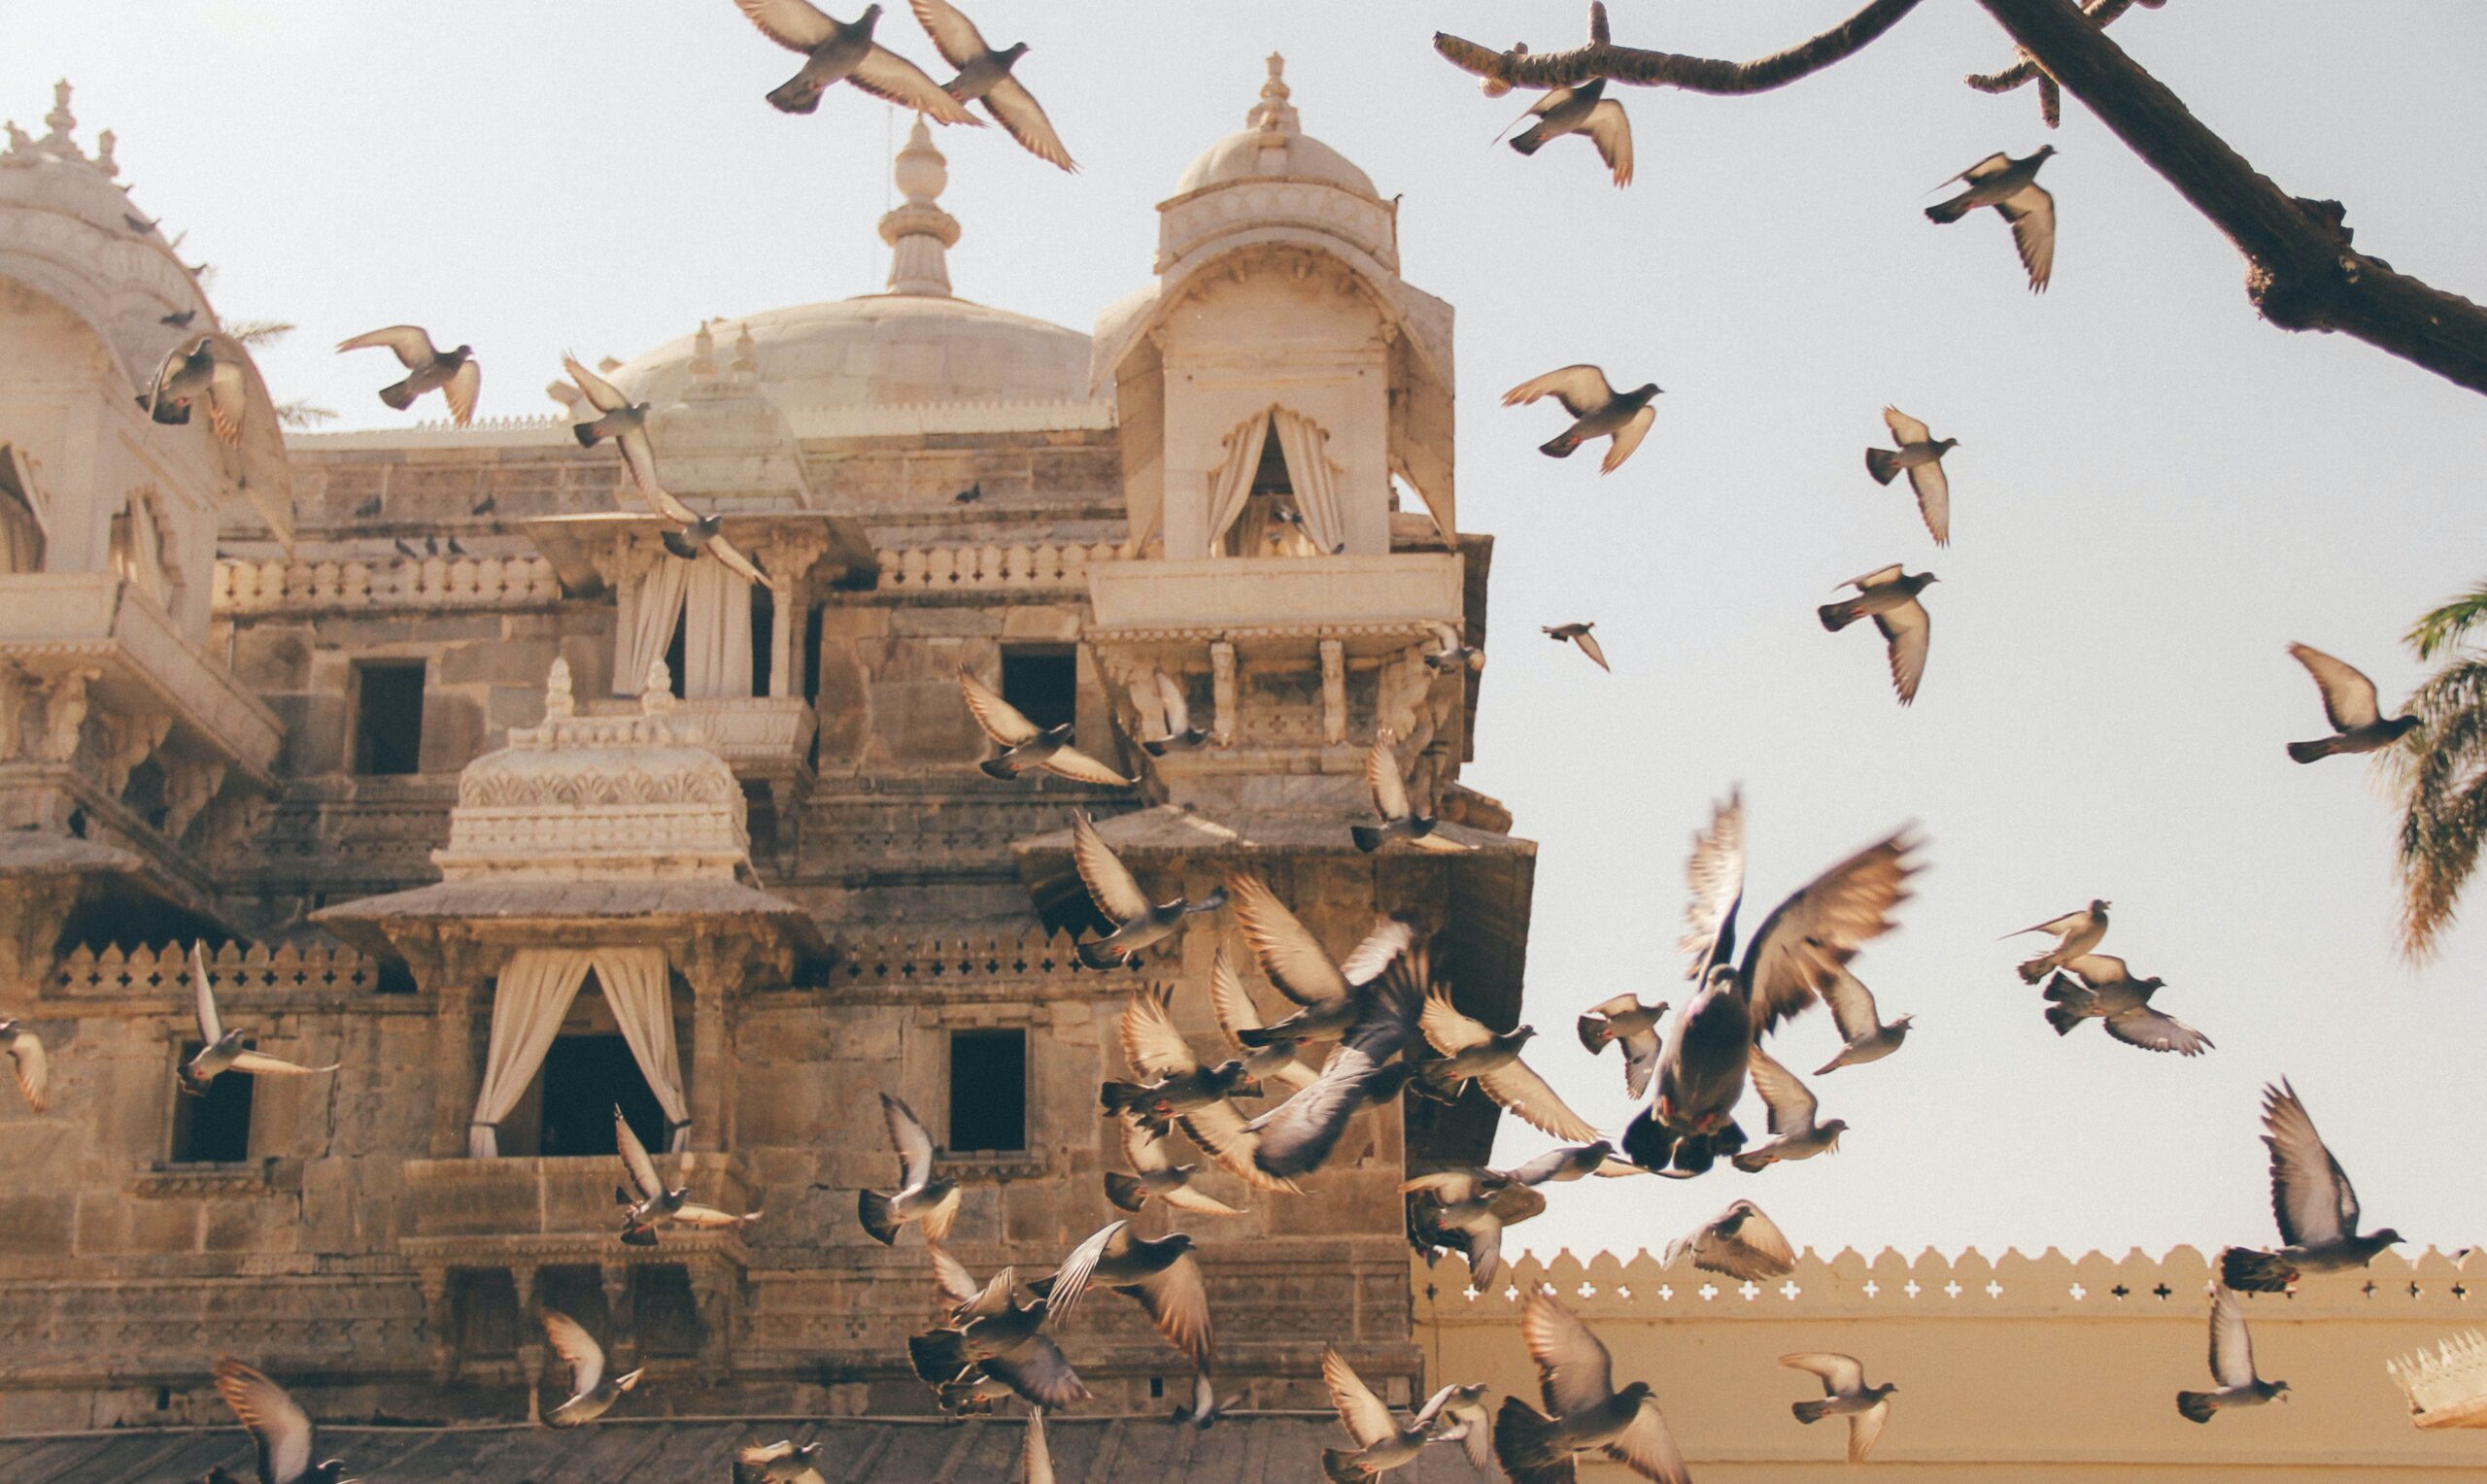 birds flying over ancient Indian monument indicating ancient Indian wisdom and it's positive impact in modern times.